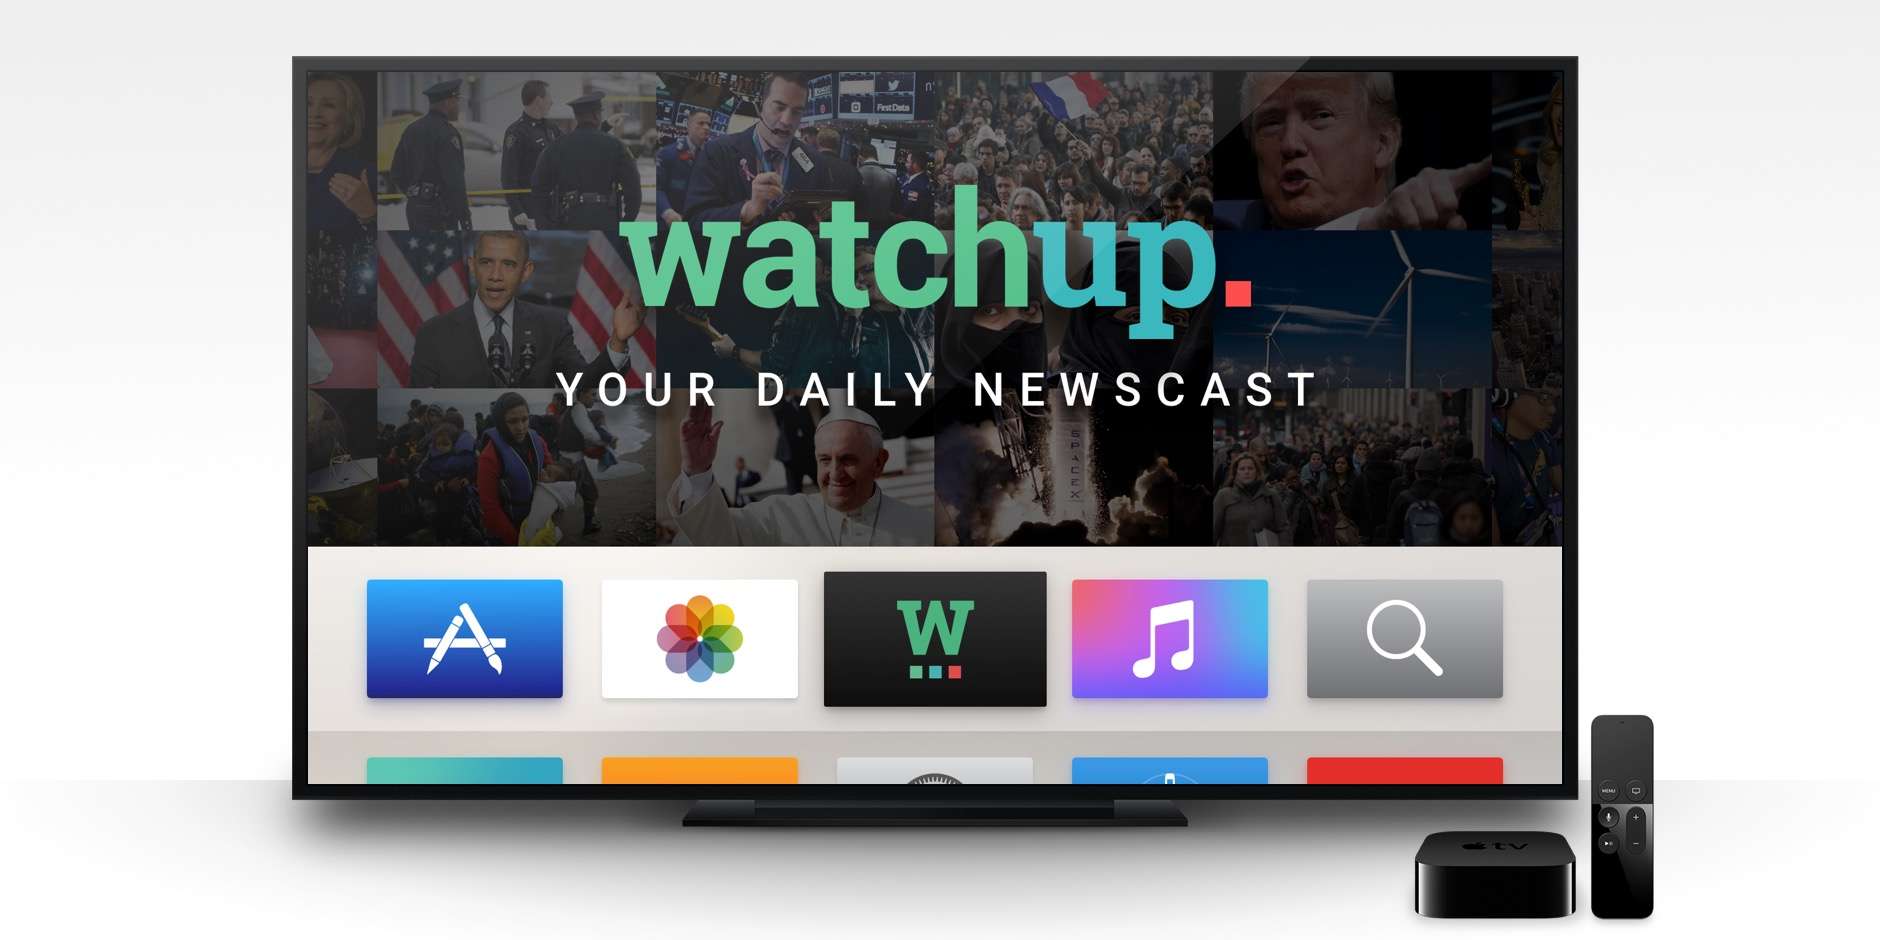 Get all your news, sans cable package, right on your Apple TV.